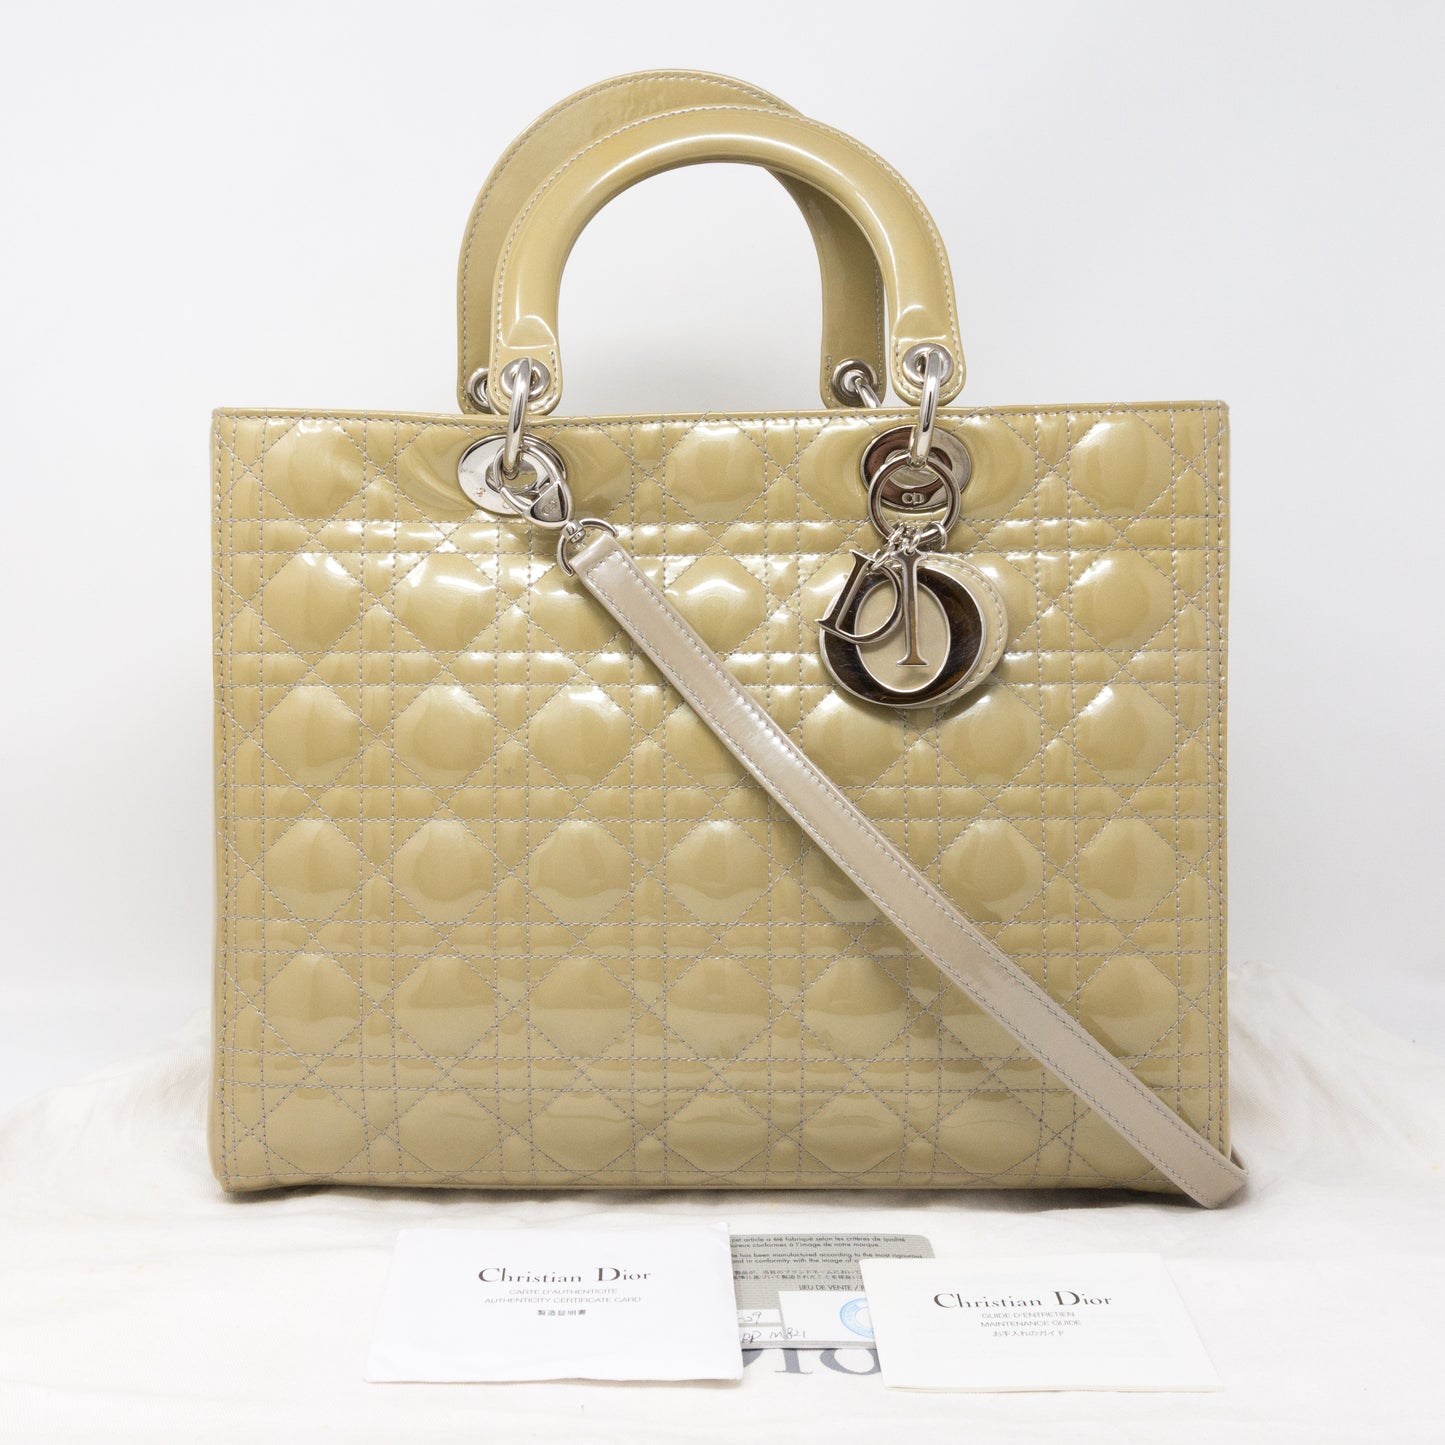 Lady Dior Large Beige Patent Leather